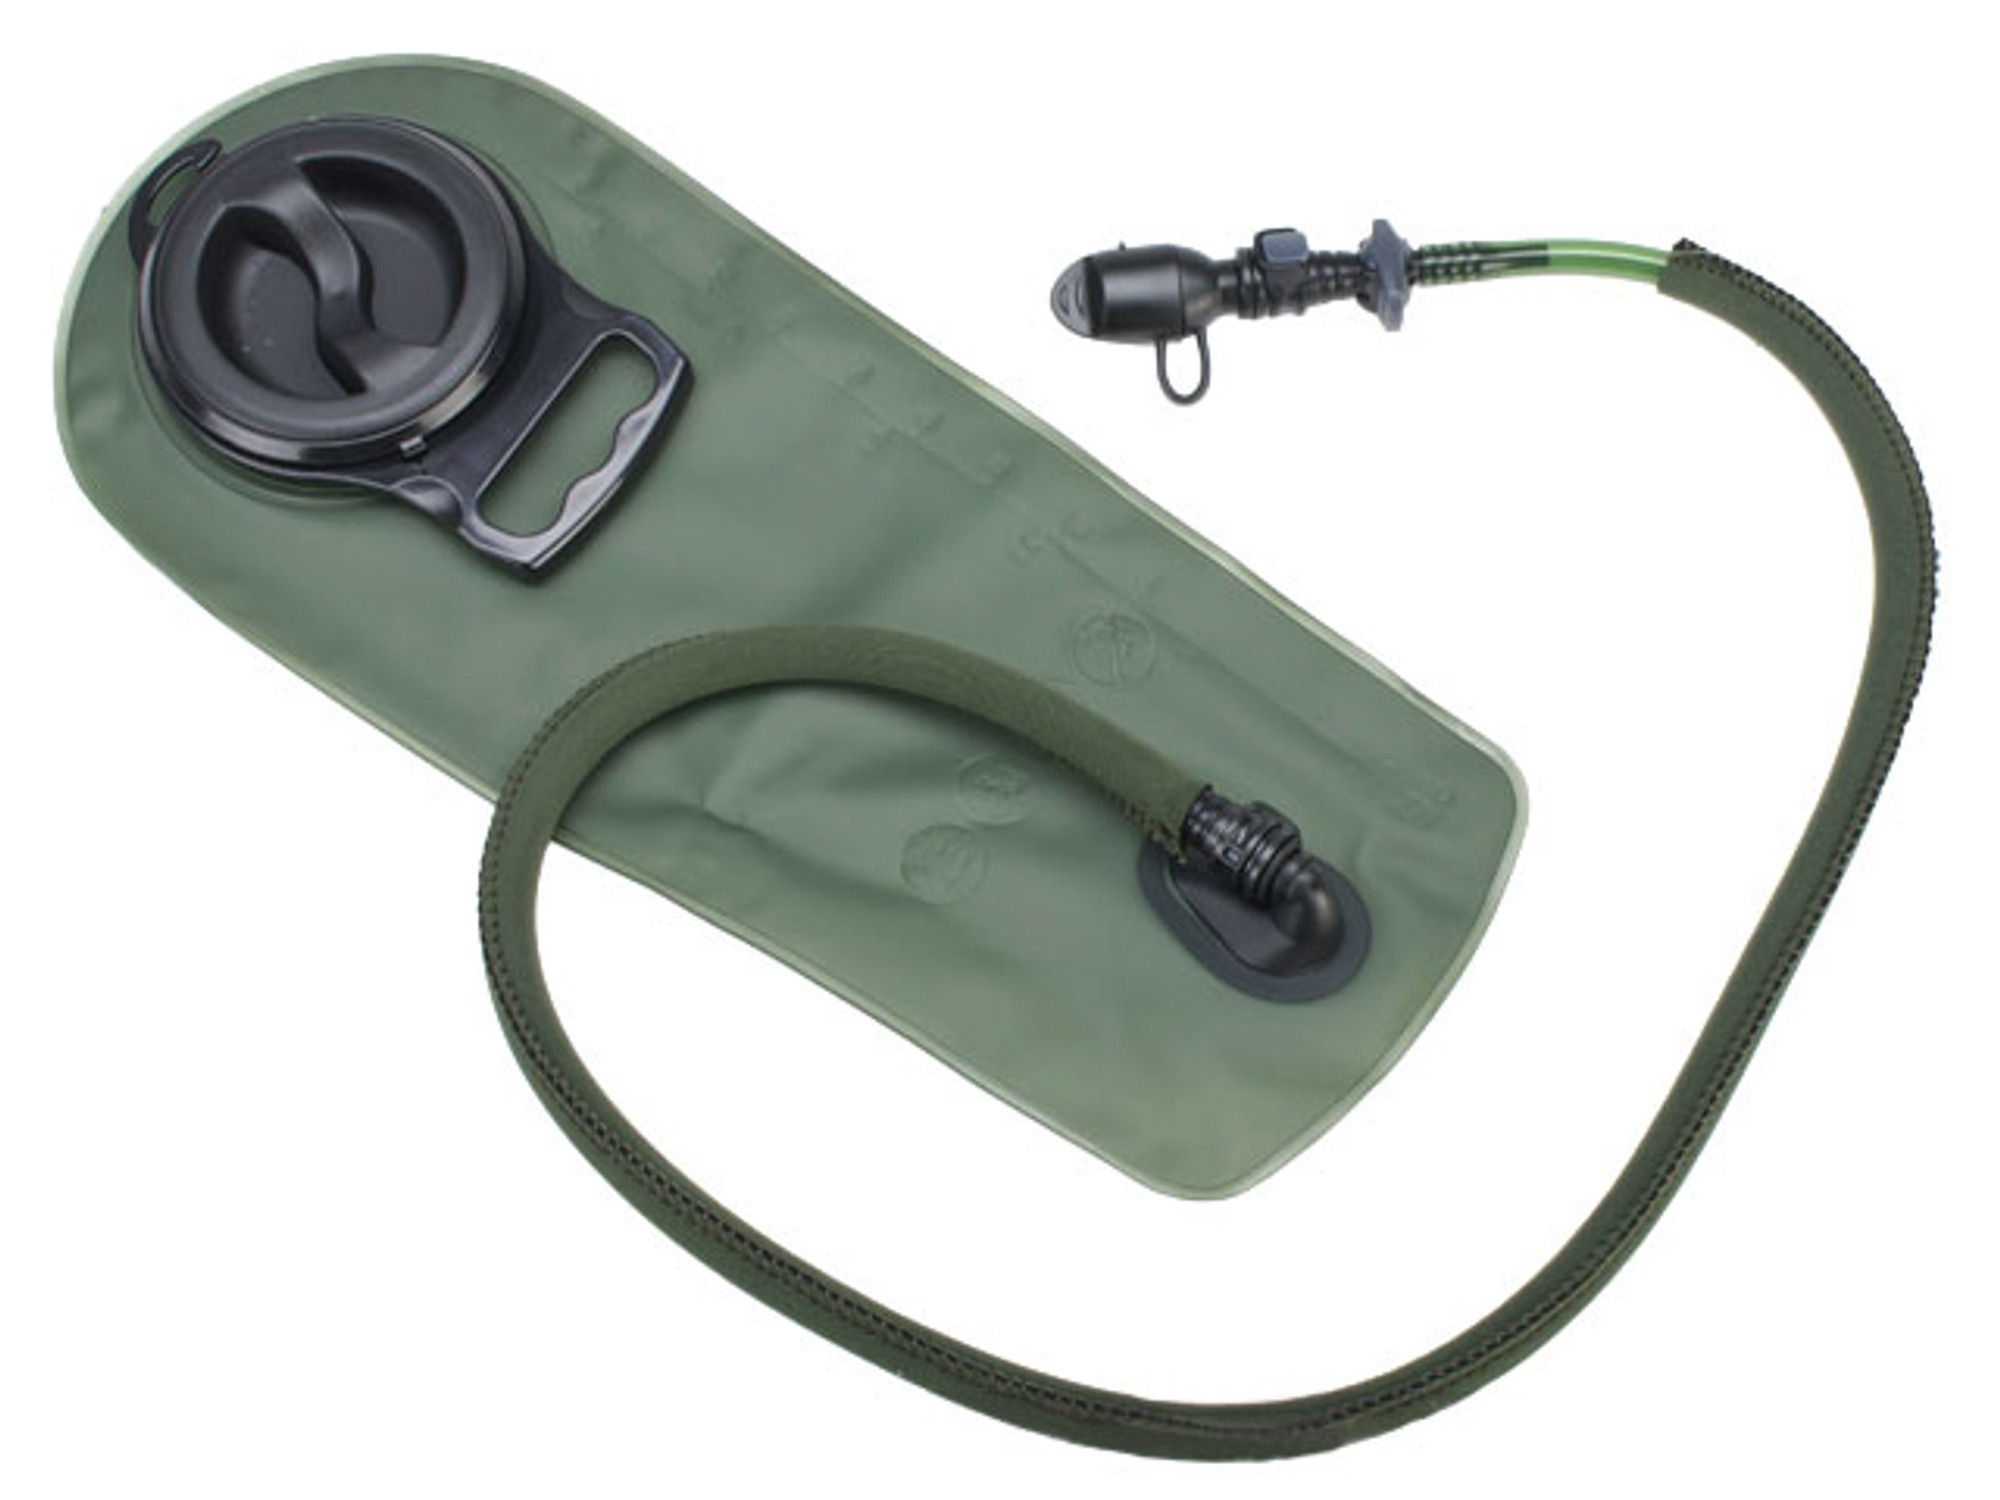 Matrix 3.0L Hydration Bladder with Insulated Hose and Detachable Mouthpiece - Black